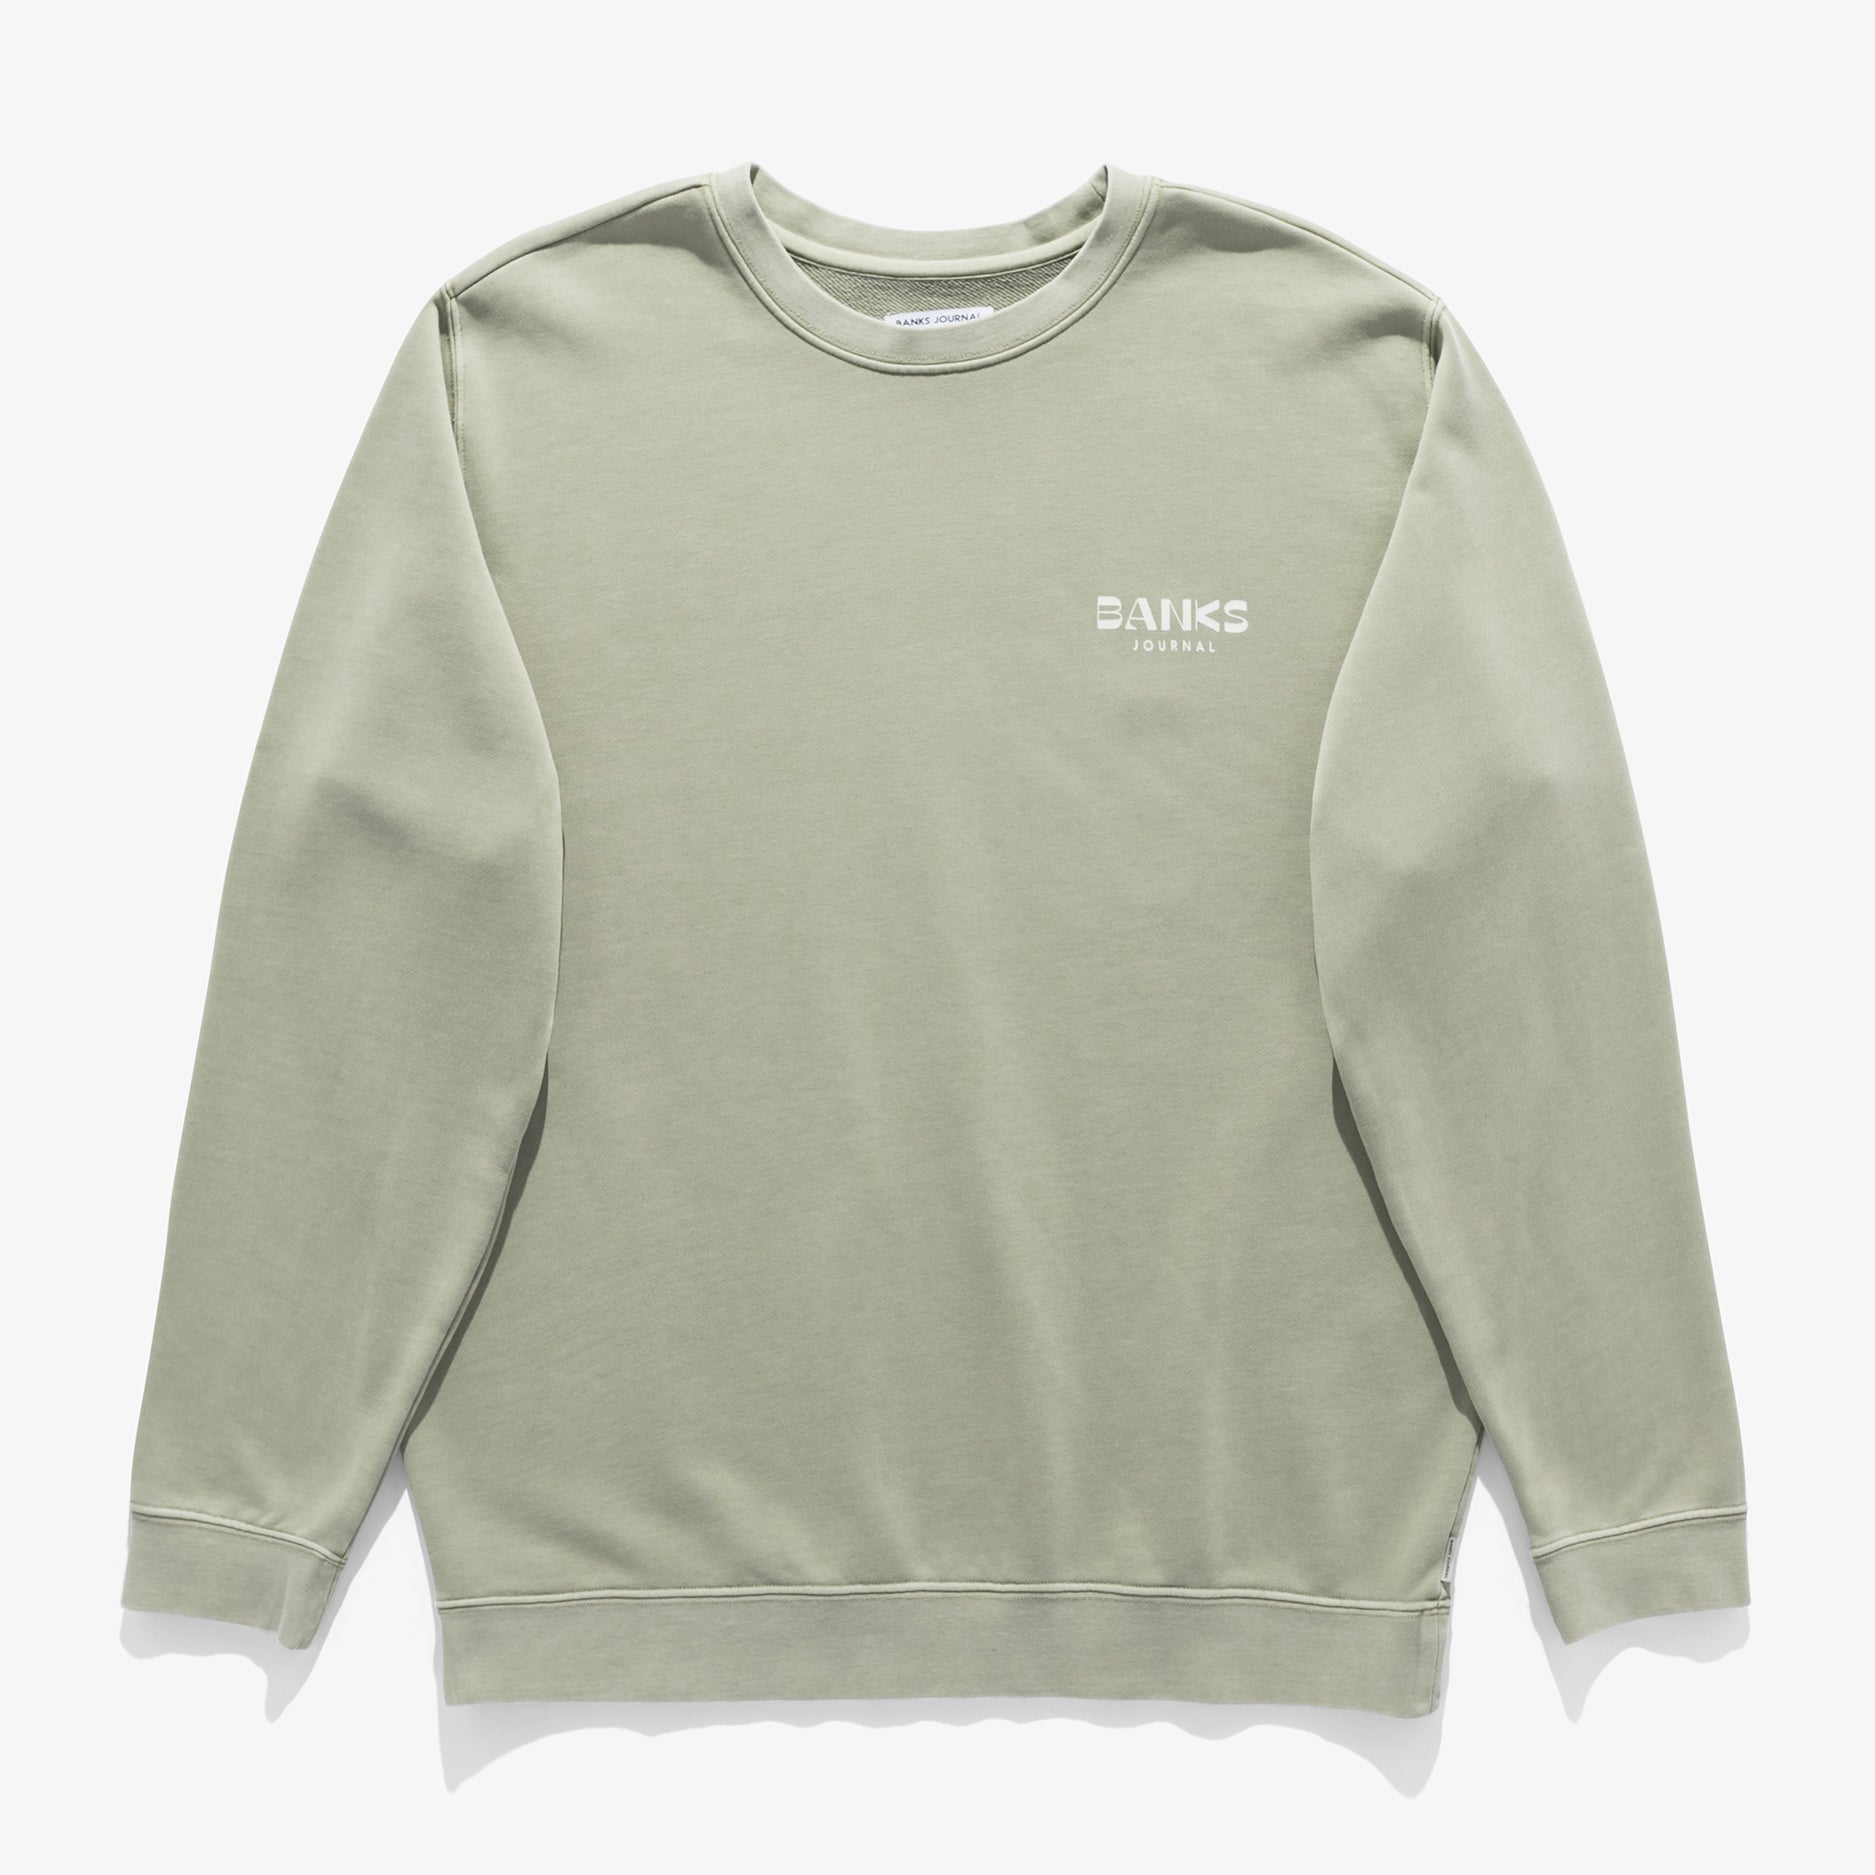 Banks Journal Off The Grid Crew Neck - Seed